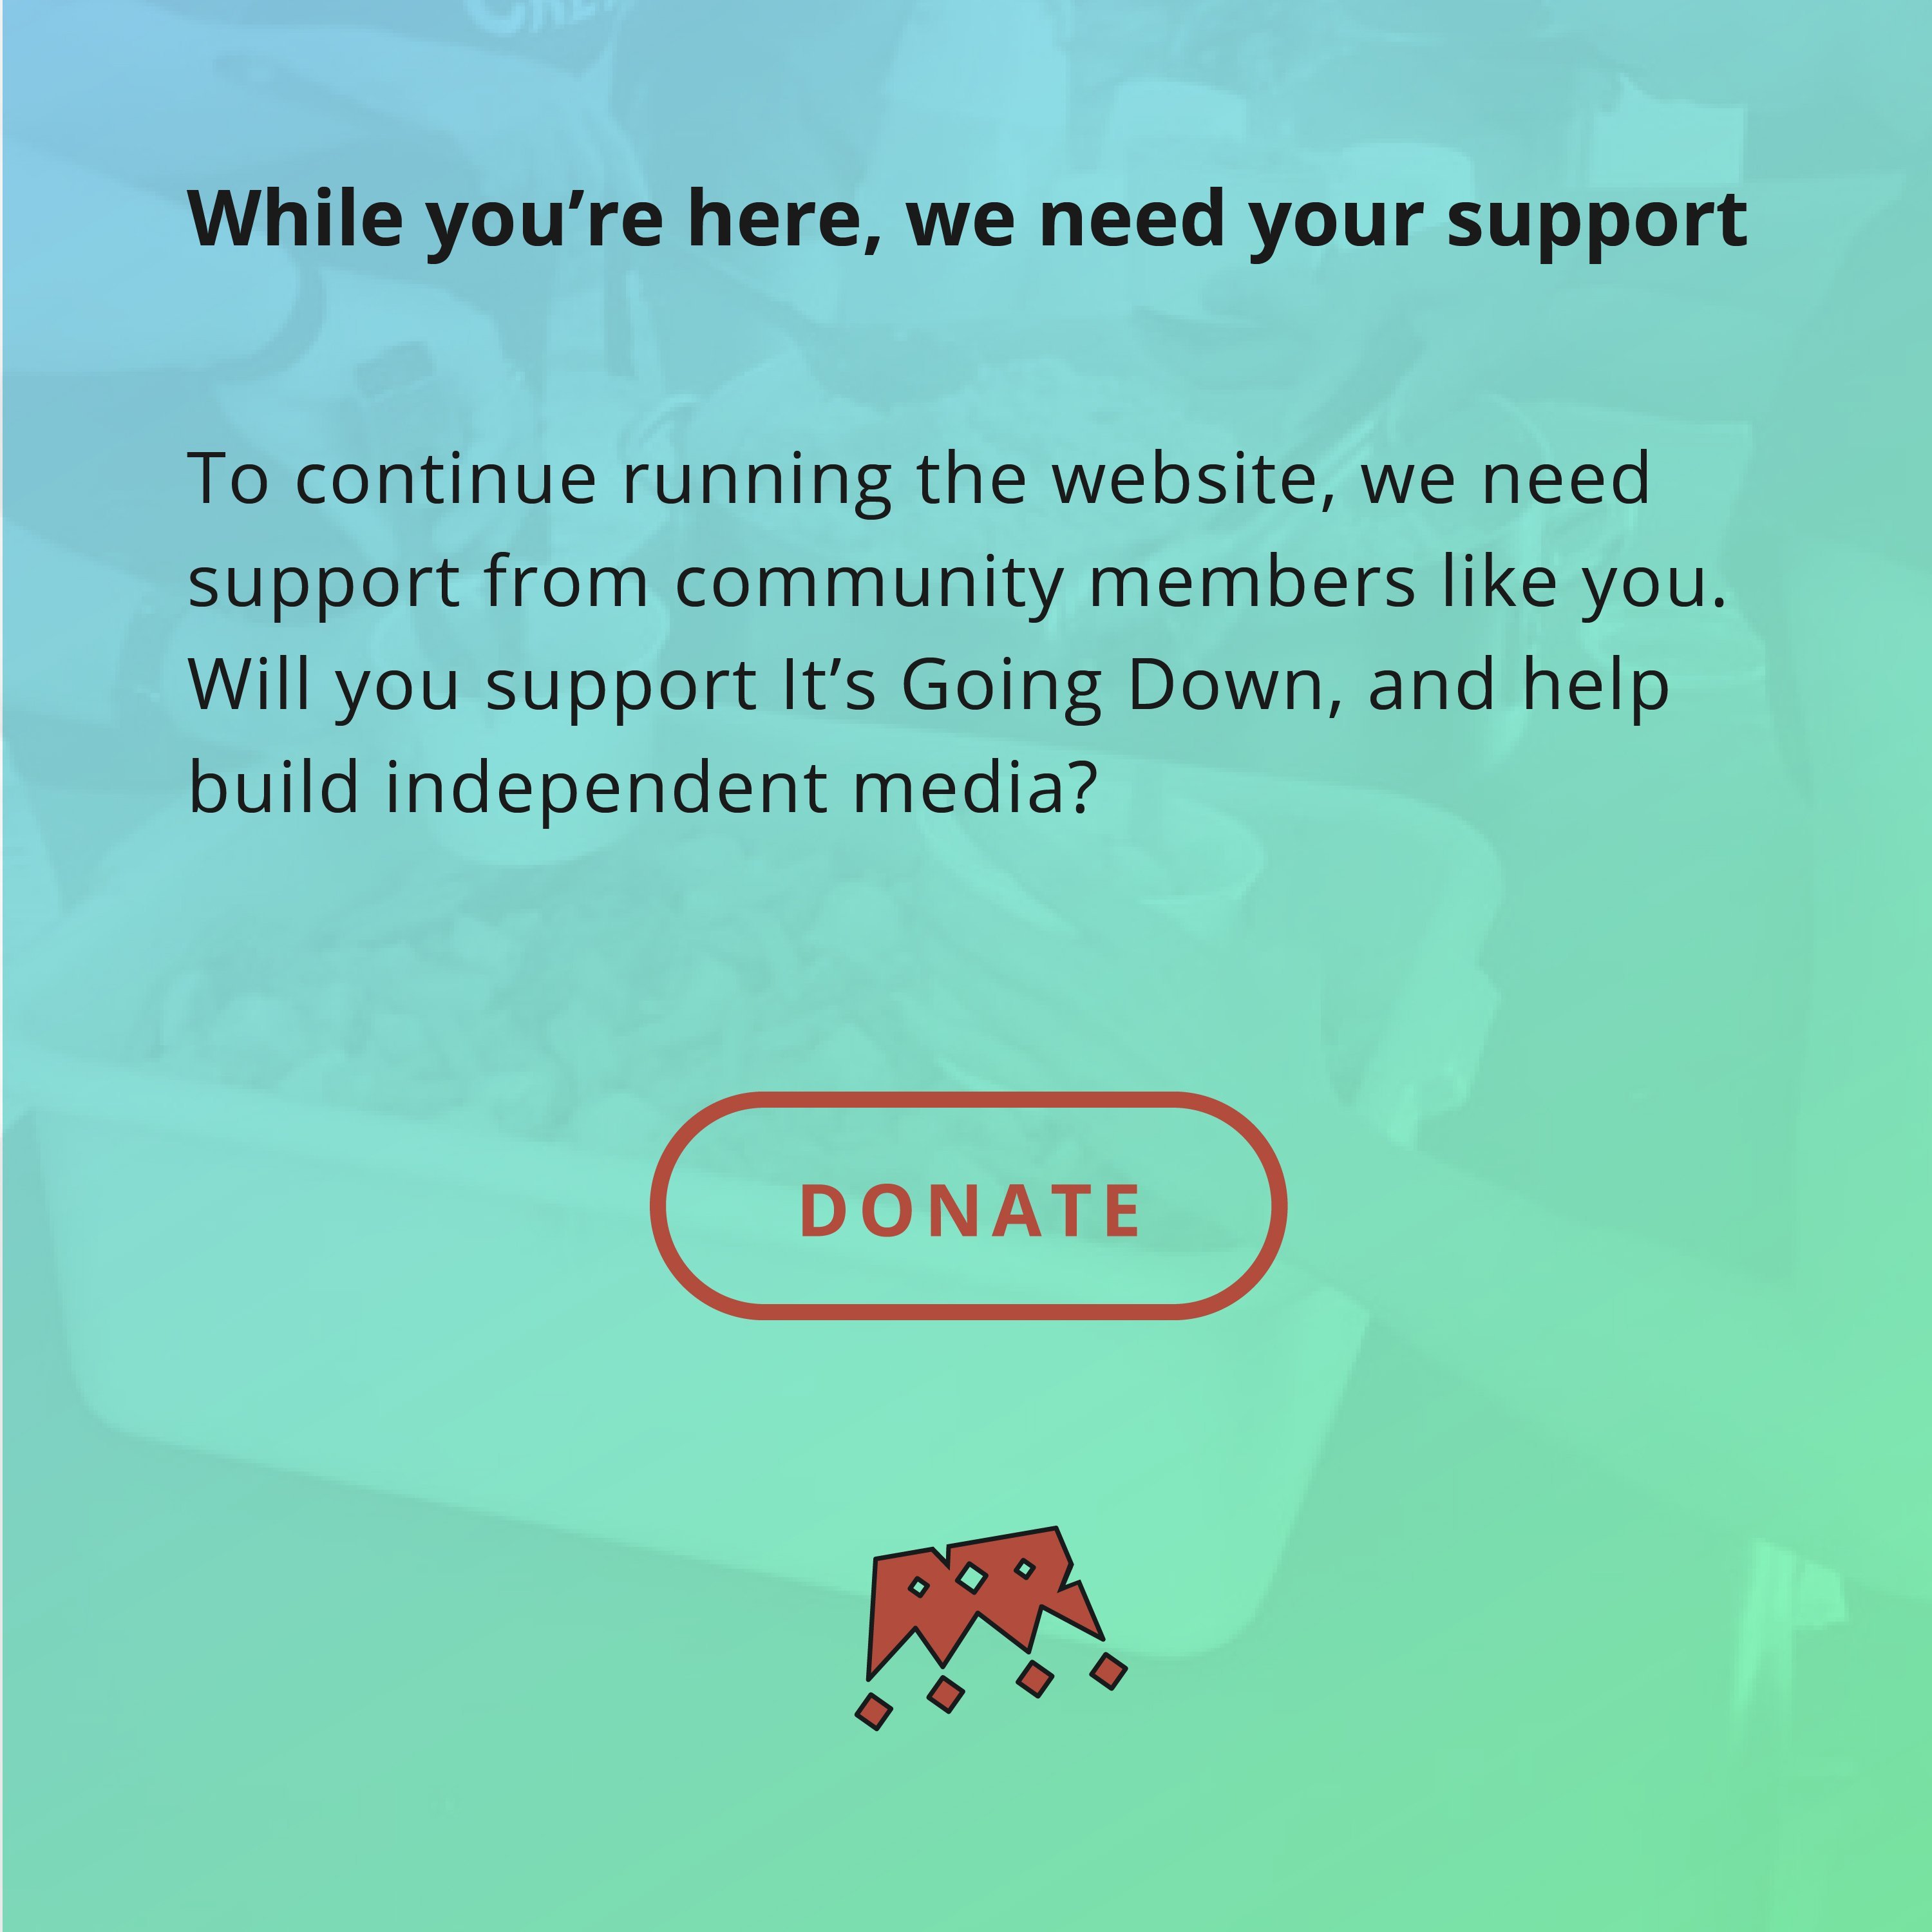 While you’re here, we need your support. To continue running the website, we need support from community members like you. Will you support It’s Going Down, and help build independent media?...so donate?